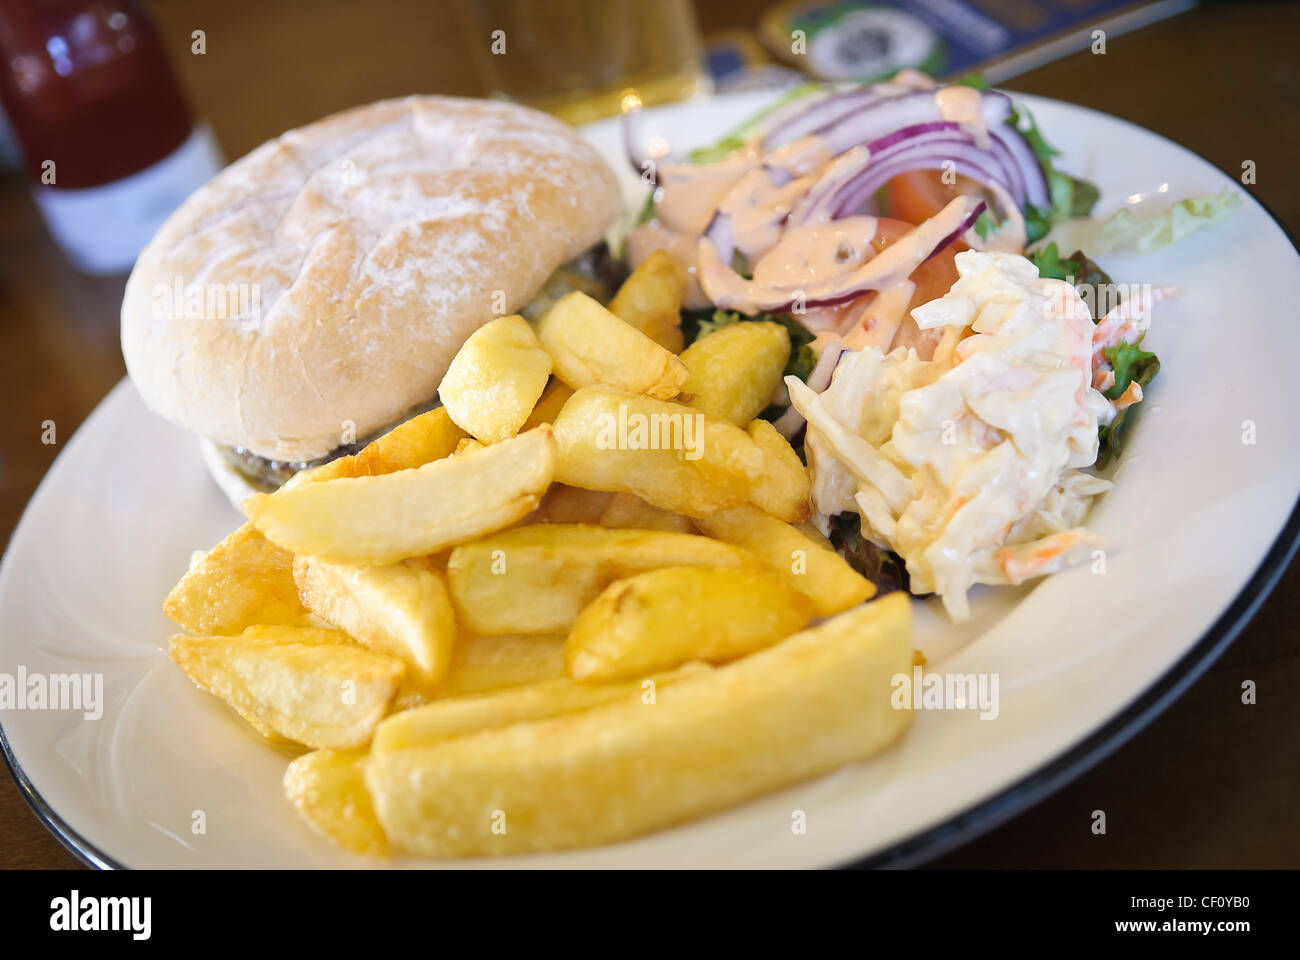 A cheap pub meal in the UK Stock Photo